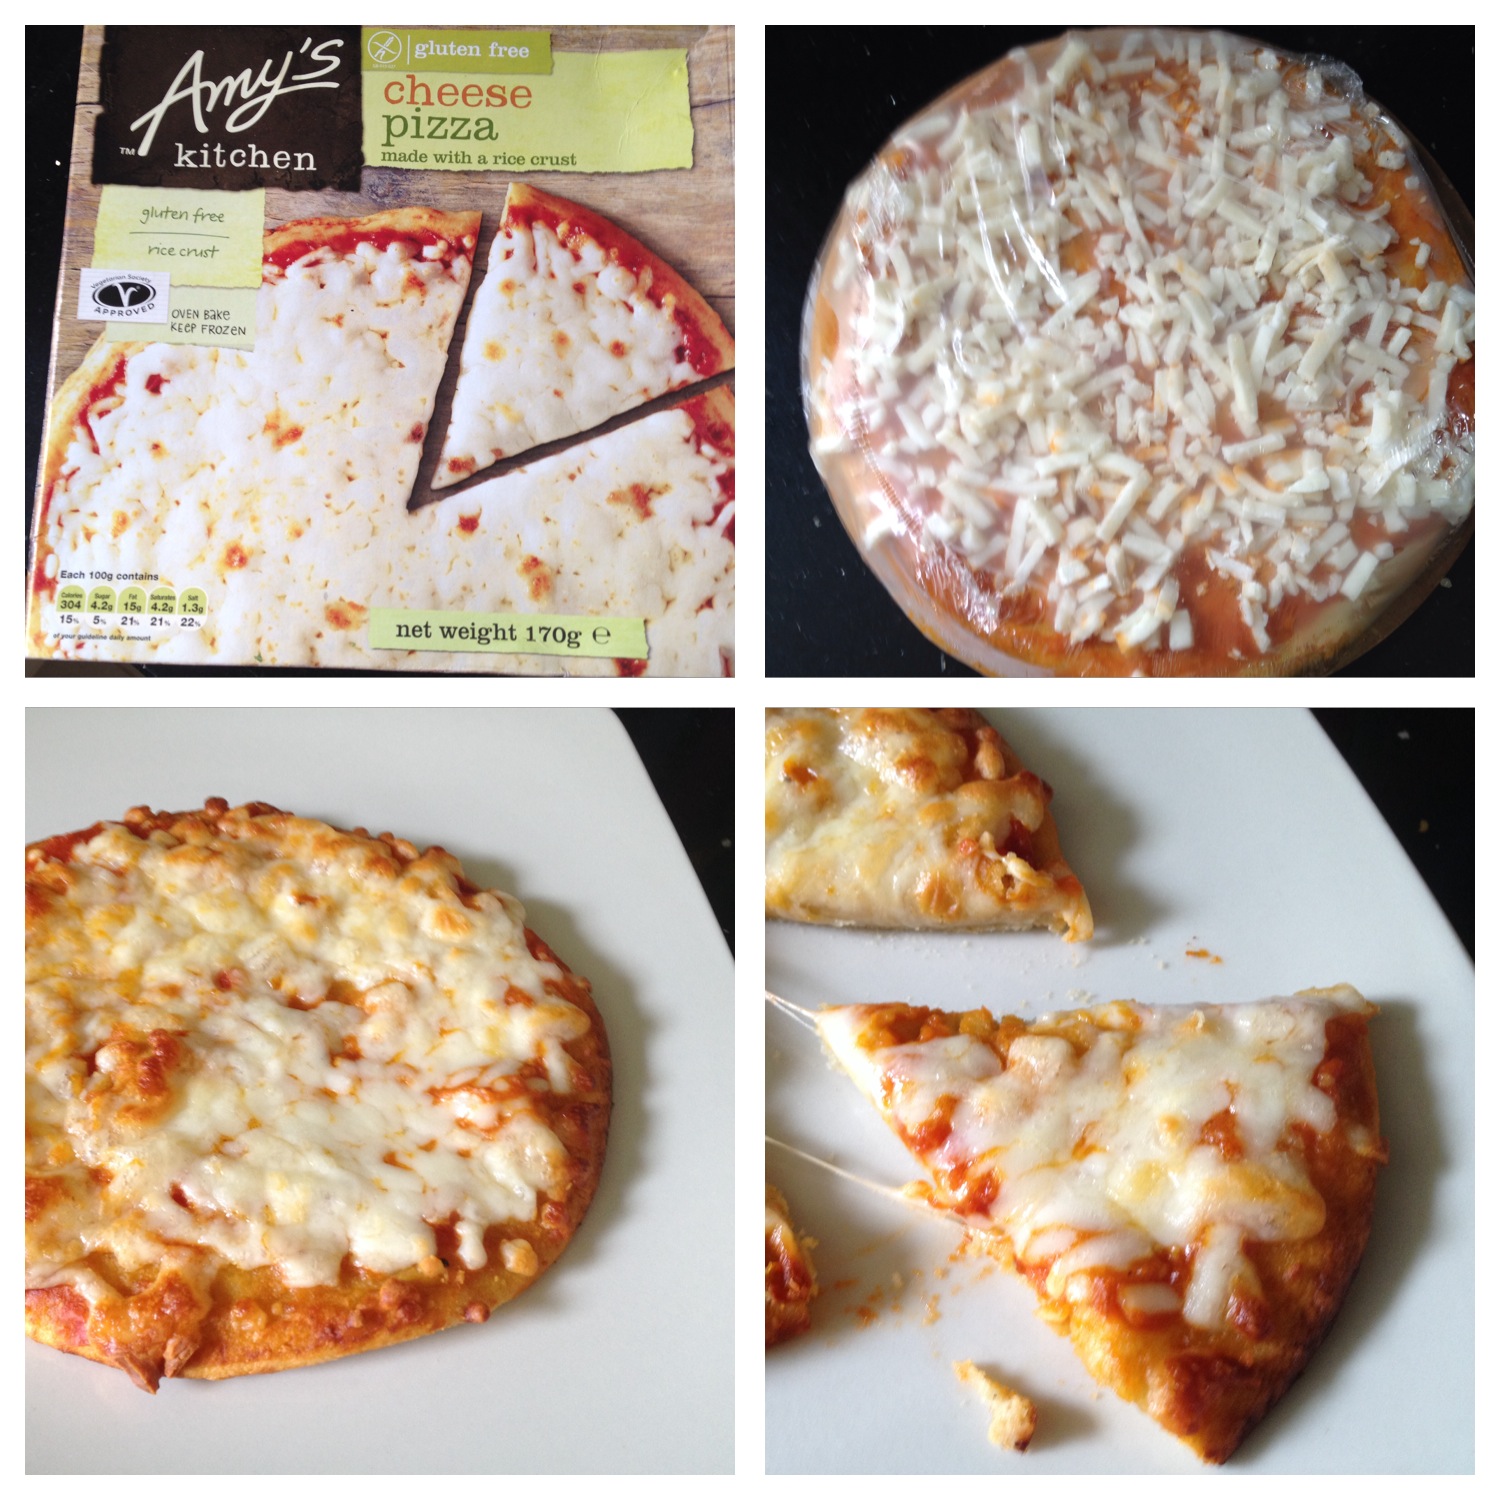 Product Review Cheese Rice Crust Gluten Free Pizza By Amys